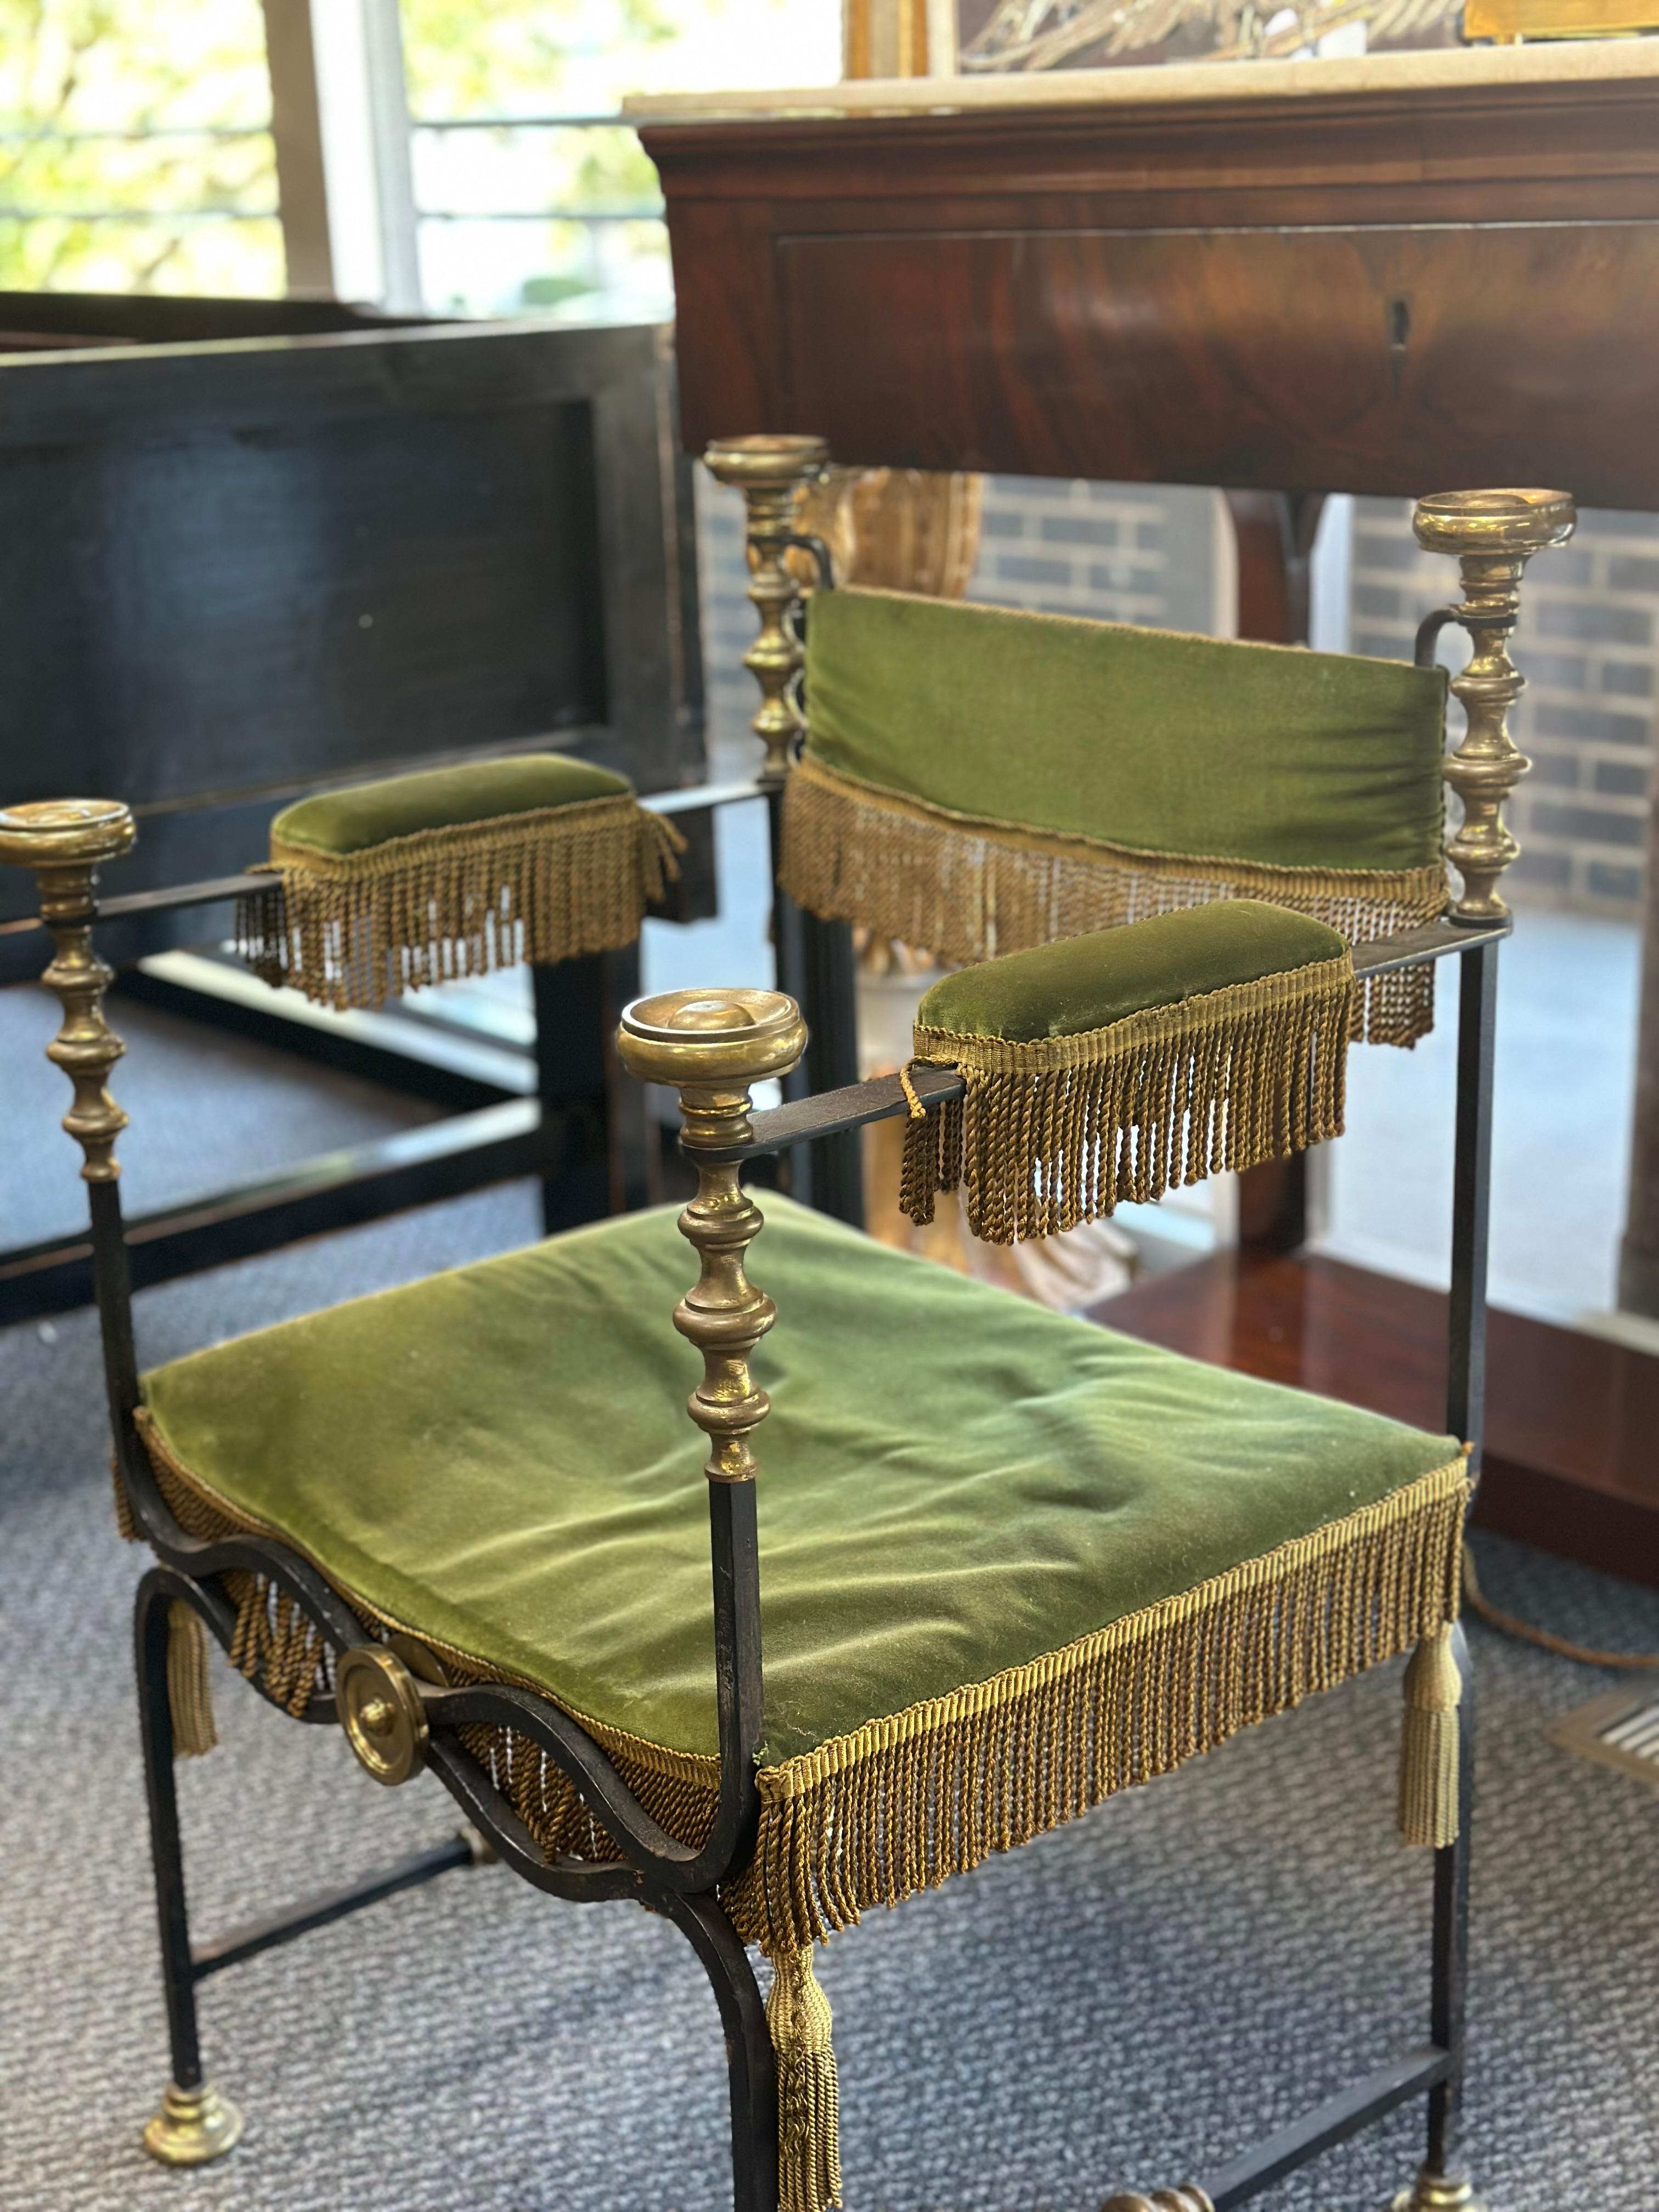 Iron armchair from Spain c1810 with super chic green velvet fabric and gold fringe in great condition. Perfect sitting beside a modern console or if you are looking for a stand alone piece for an entrance. 